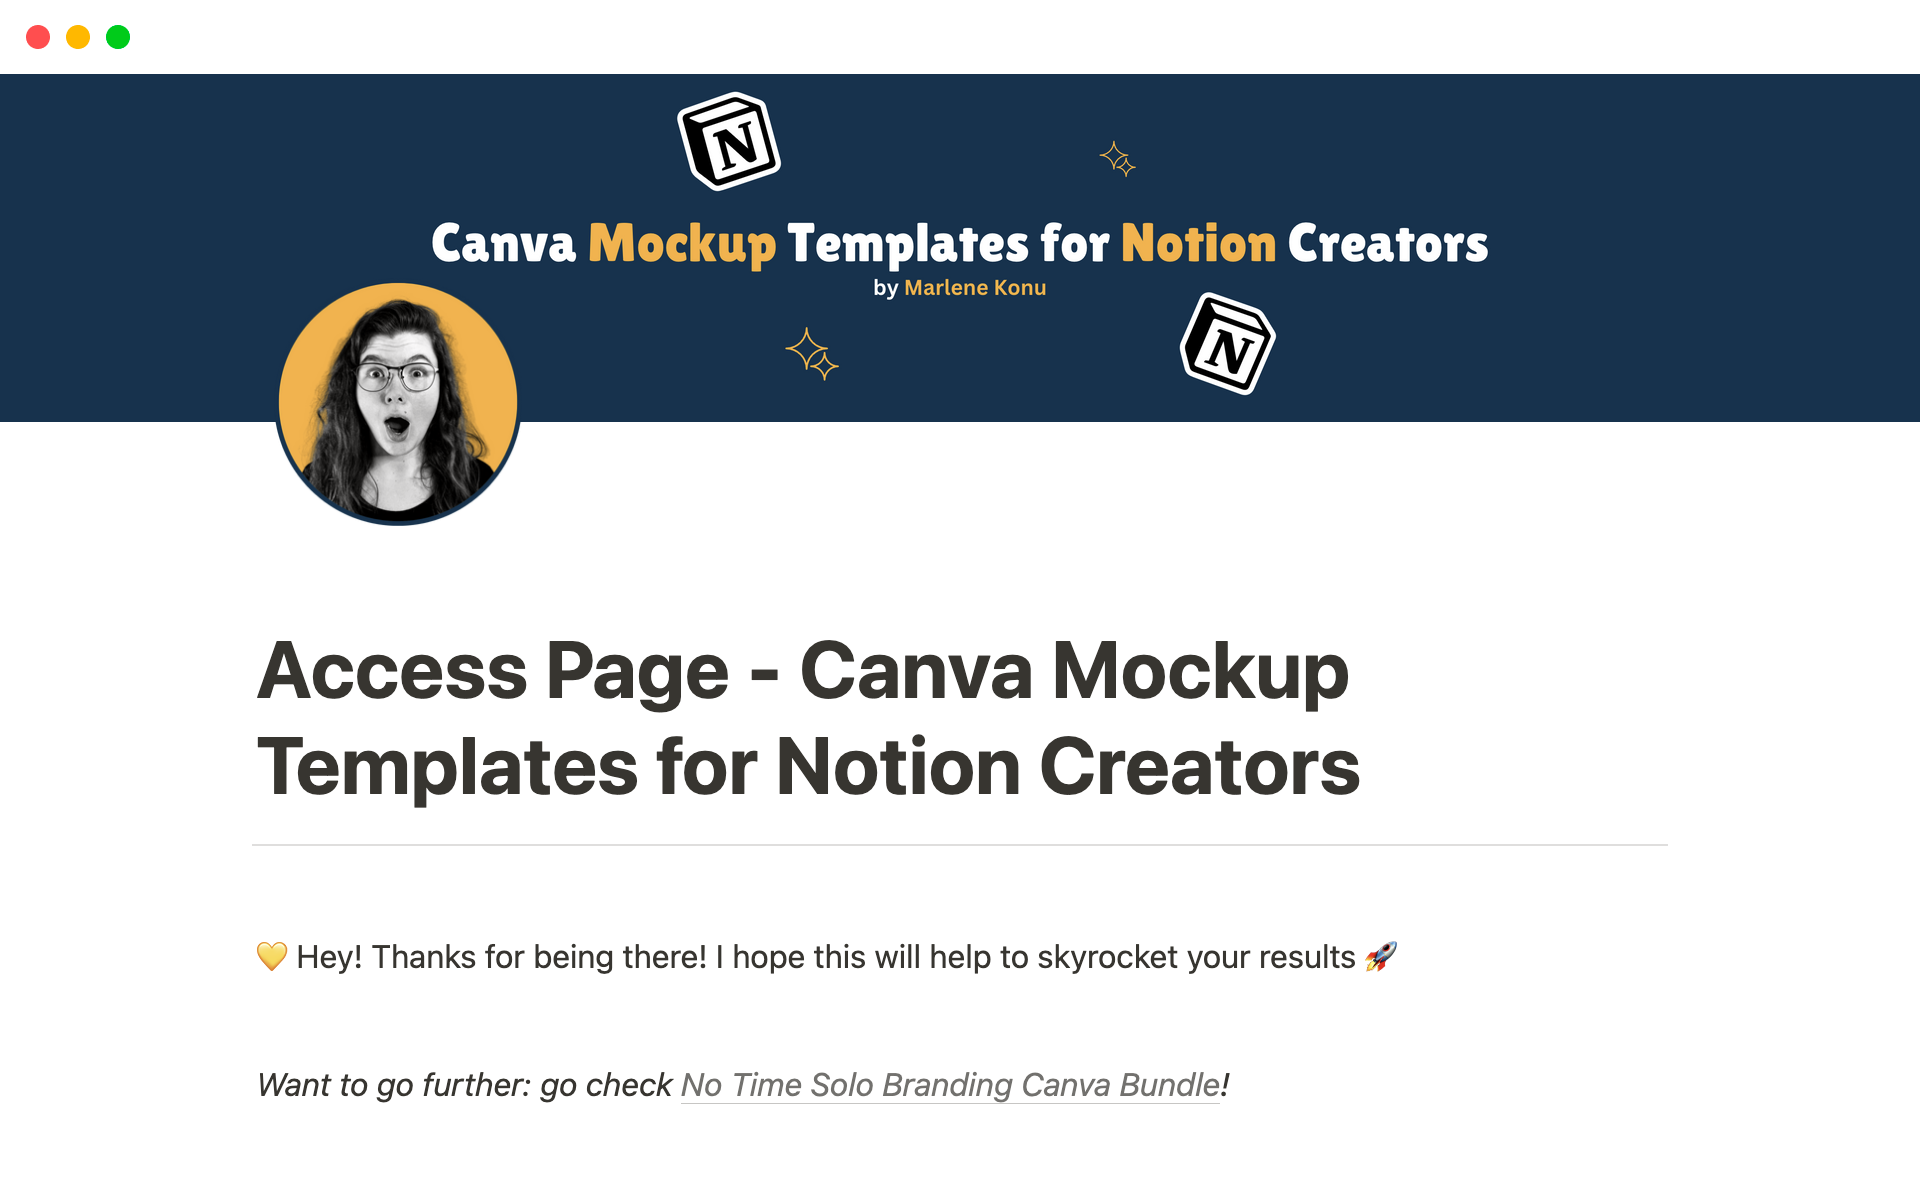 A template preview for Canva Mockup Templates for Notion Creators